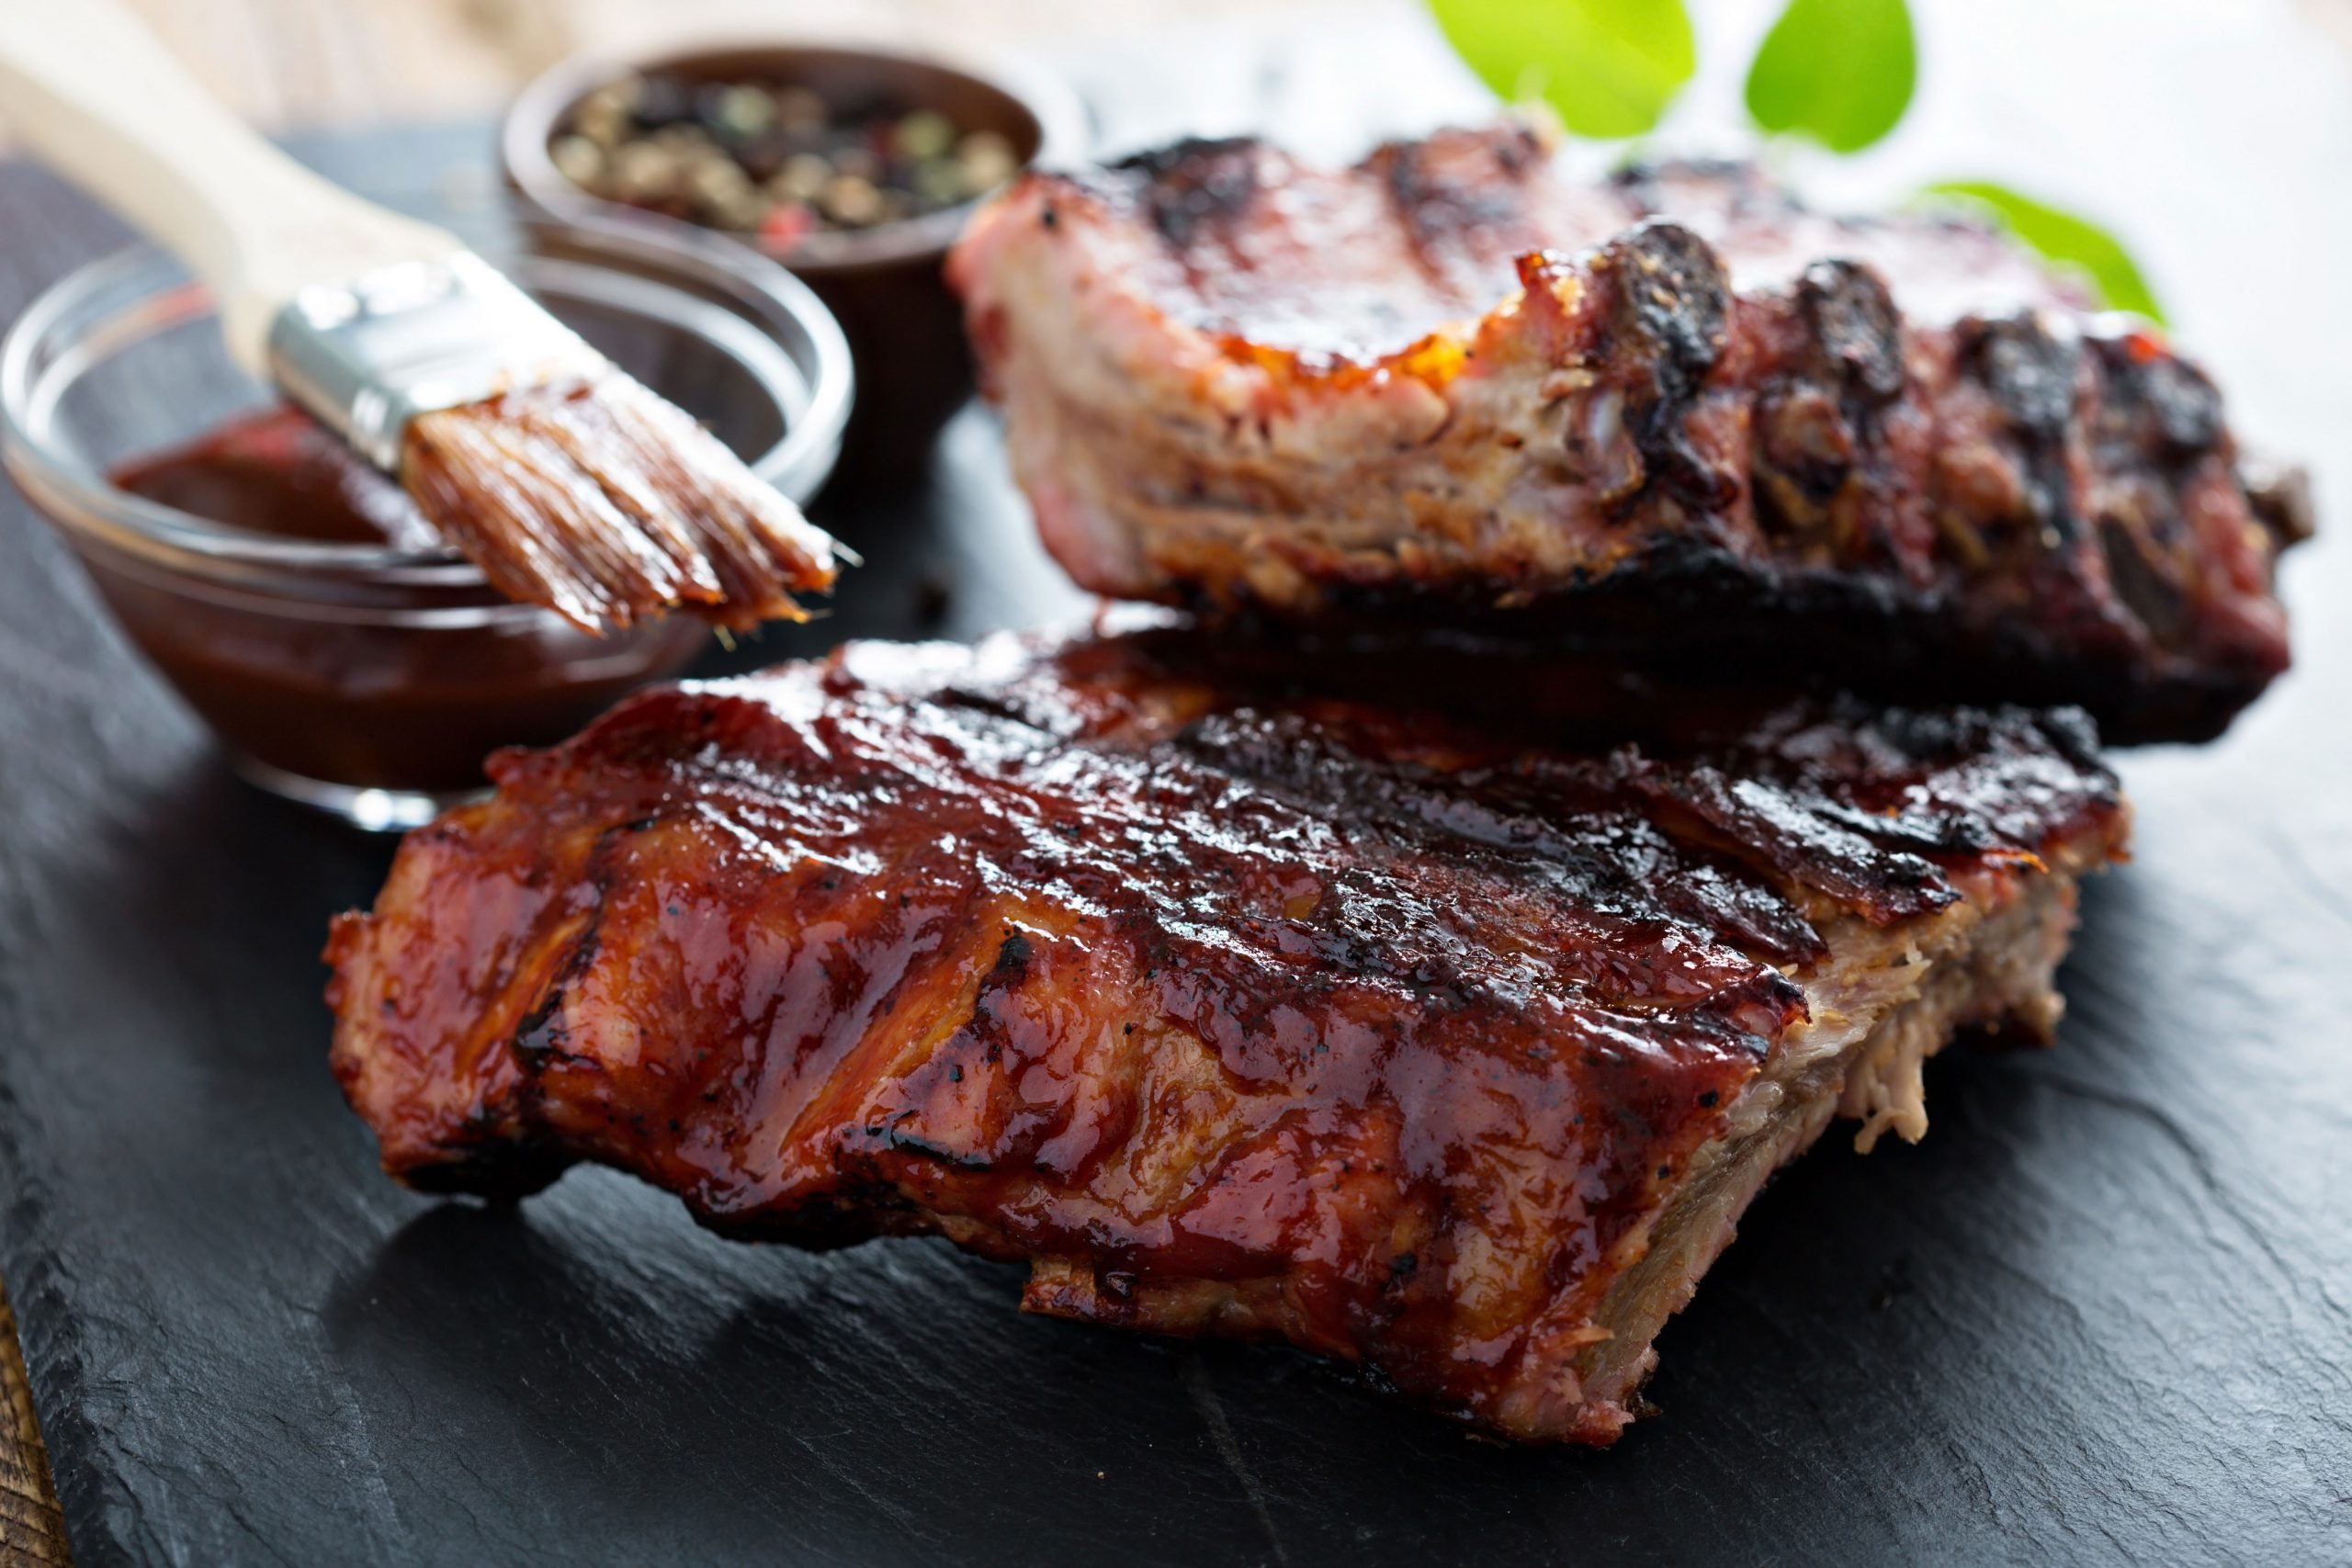 Natural Beef Ribs with Barbecue Sauce